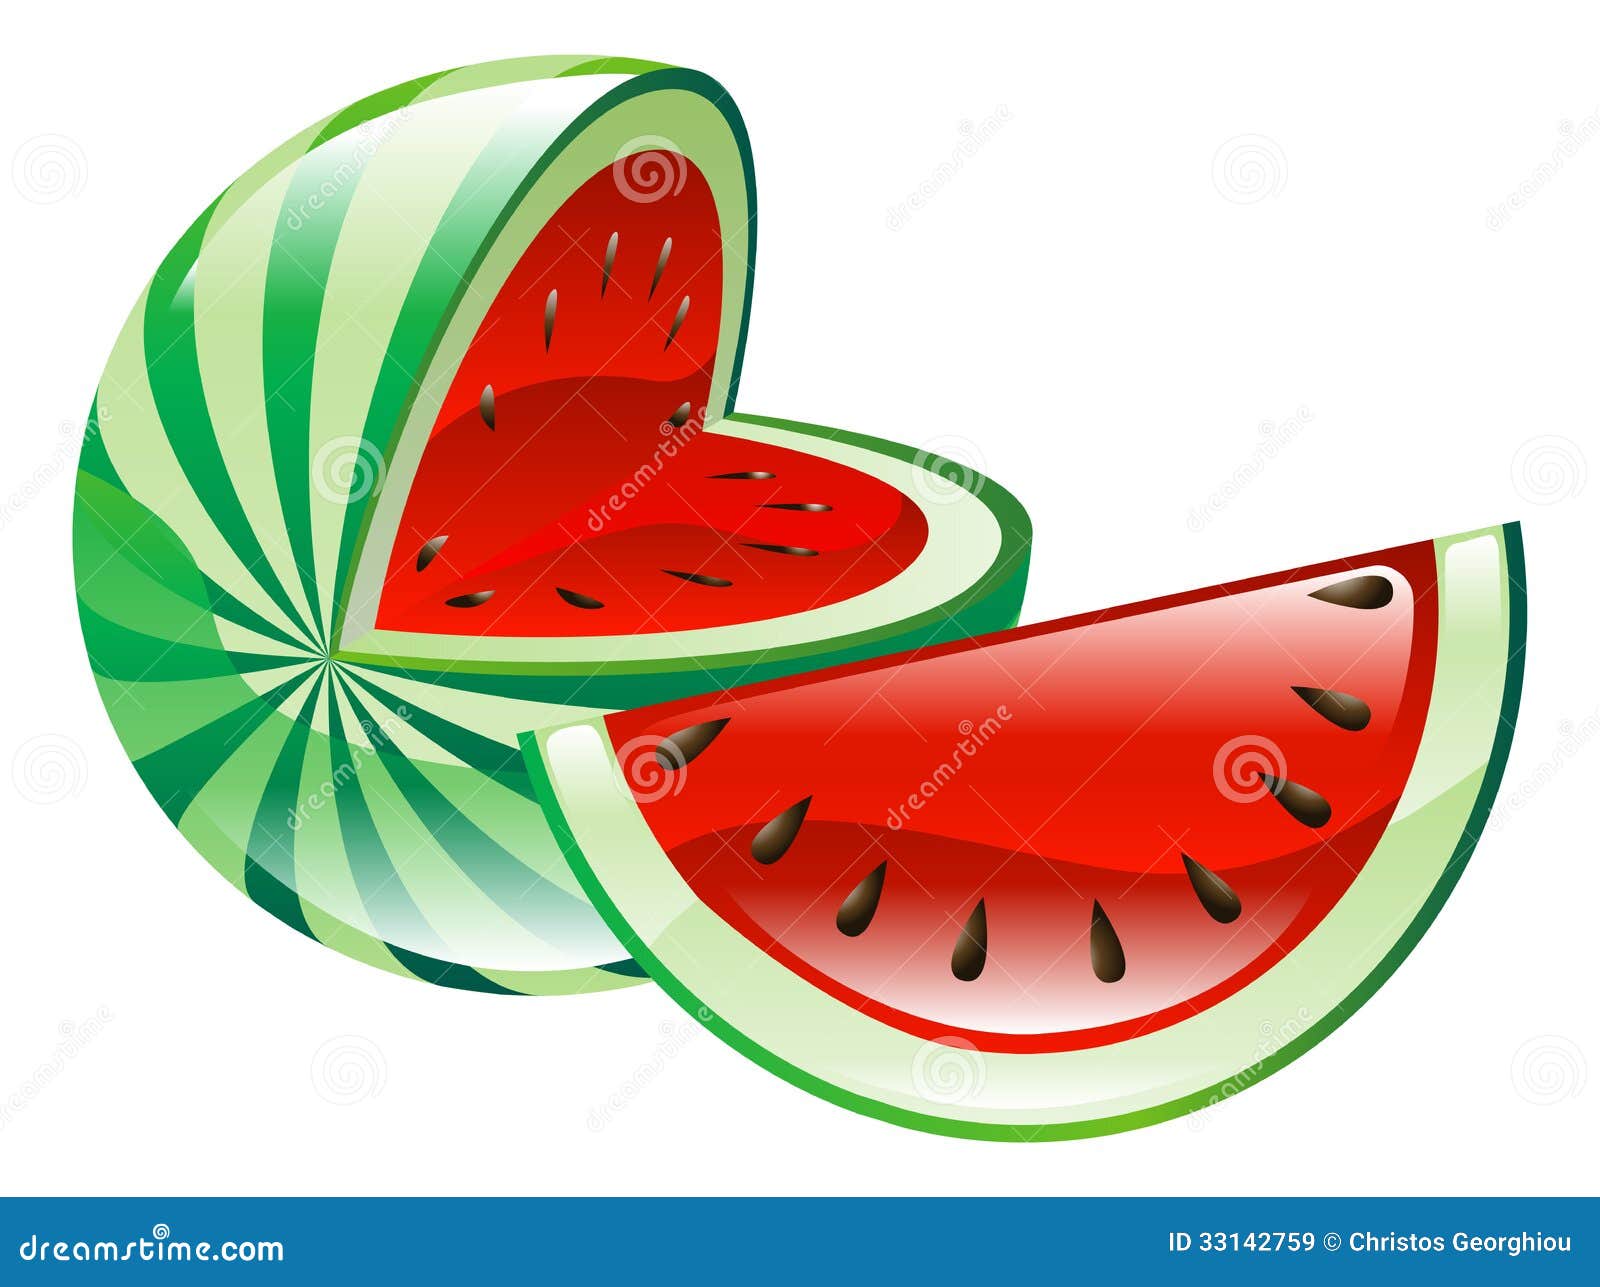  of watermelon fruit icon clipart